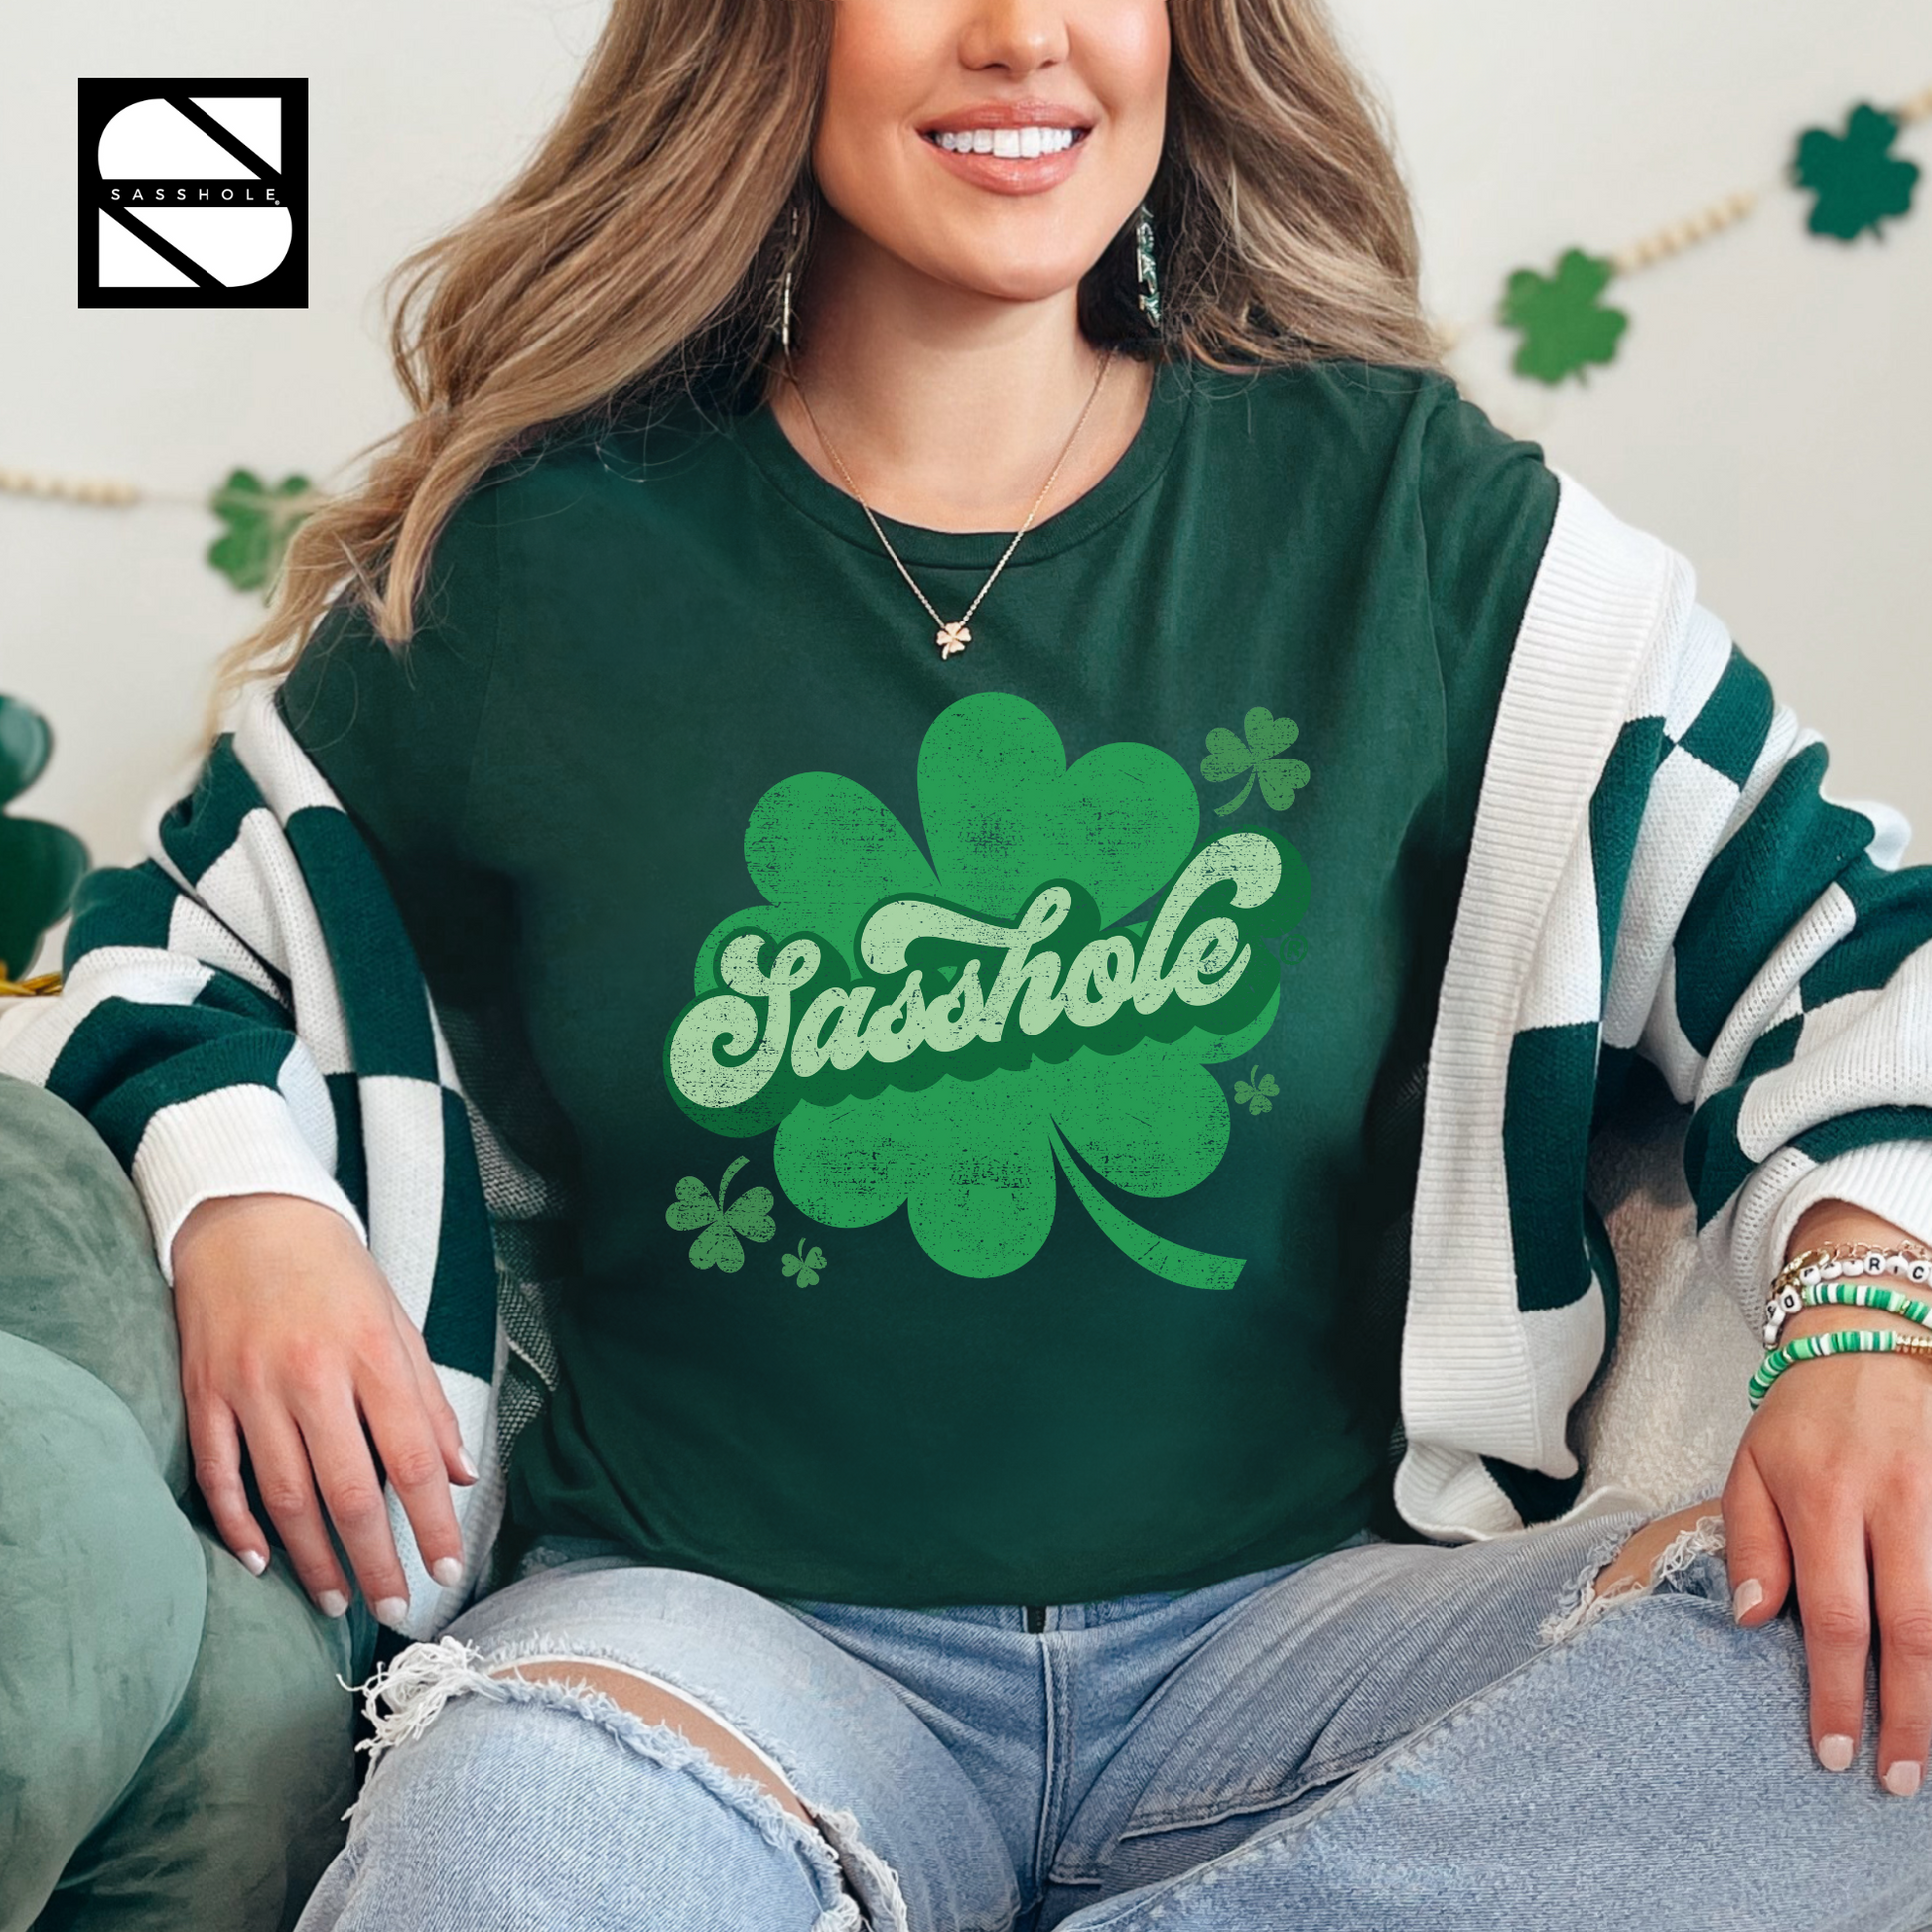 Women's St. Pat's apparel, Women's Clothing, Unisex Irish tee, Unisex, Unique Irish tops, Unique Irish humor tee, Unique Irish charm tee, Trendy St. Patrick's Day top, T-shirts, St. Patrick's party apparel, St. Patrick's festivities wear, St. Patrick's fashion, St. Patrick's Day shirt, St. Patrick's Day humor, St Patricks Day Shirt Women, Shamrock sassiness, Shamrock outfit, Sassy St. Patrick's Day wear, Sassy St. Pat's wear, Sasshole® luck style